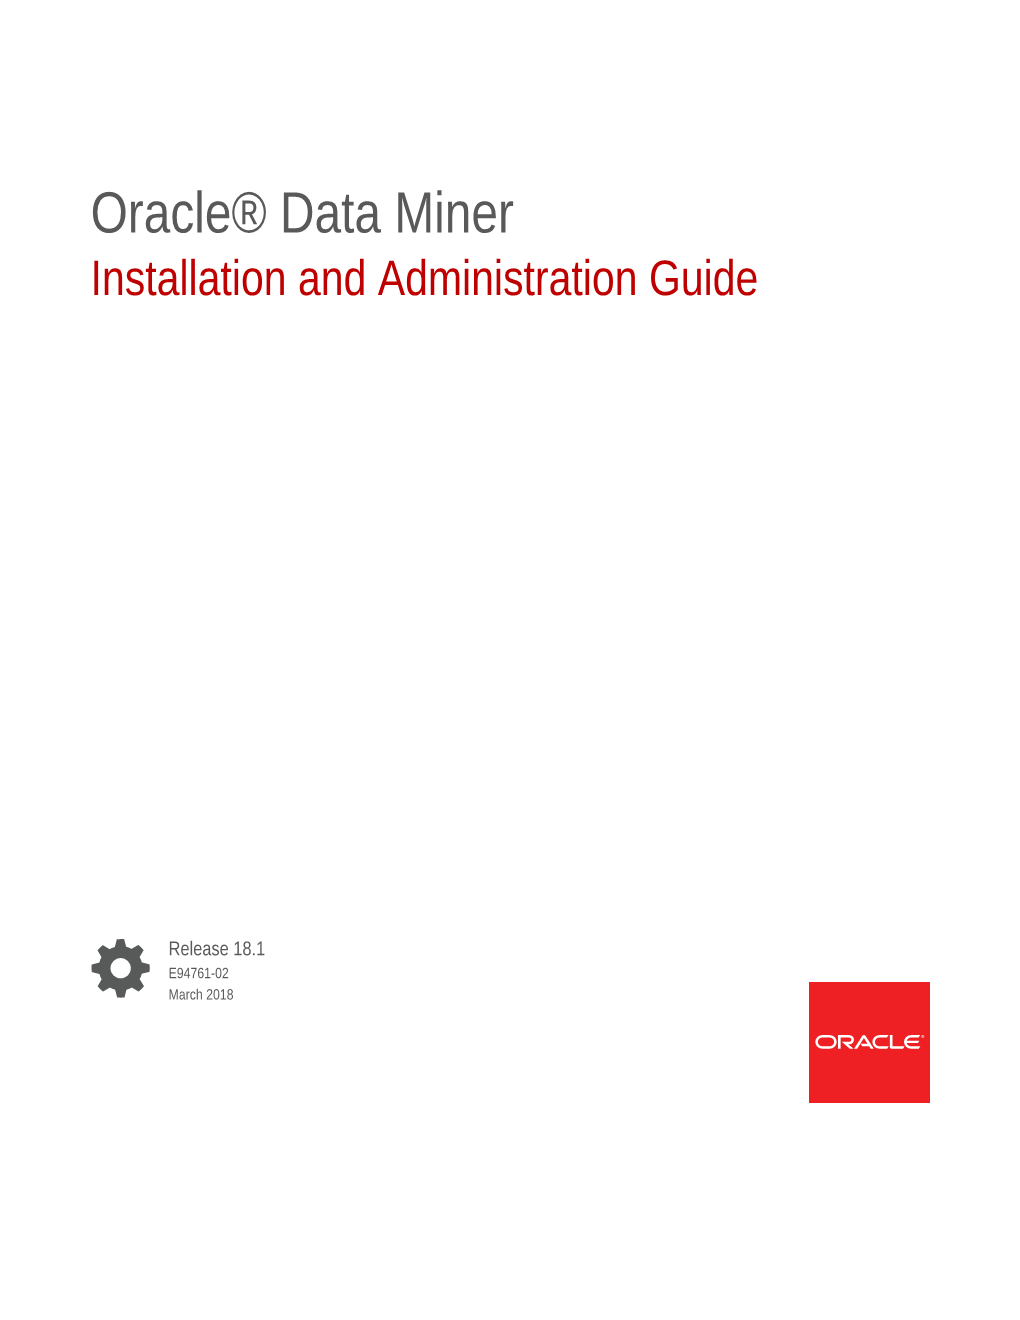 Oracle® Data Miner Installation and Administration Guide